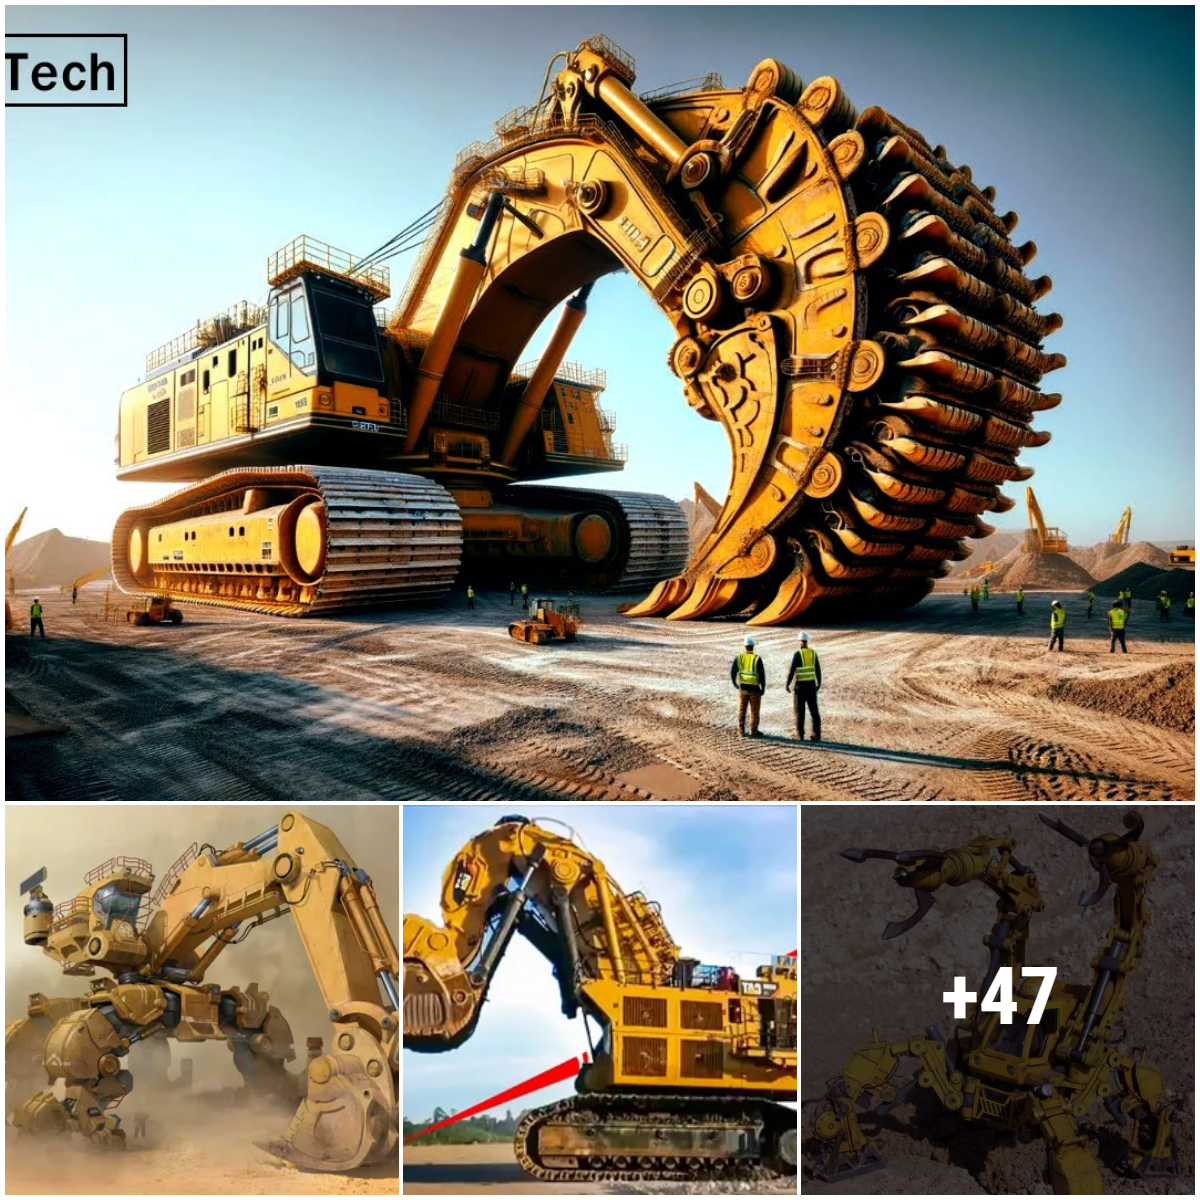 Witness the enhanced power of heavy machinery mechanical marvels